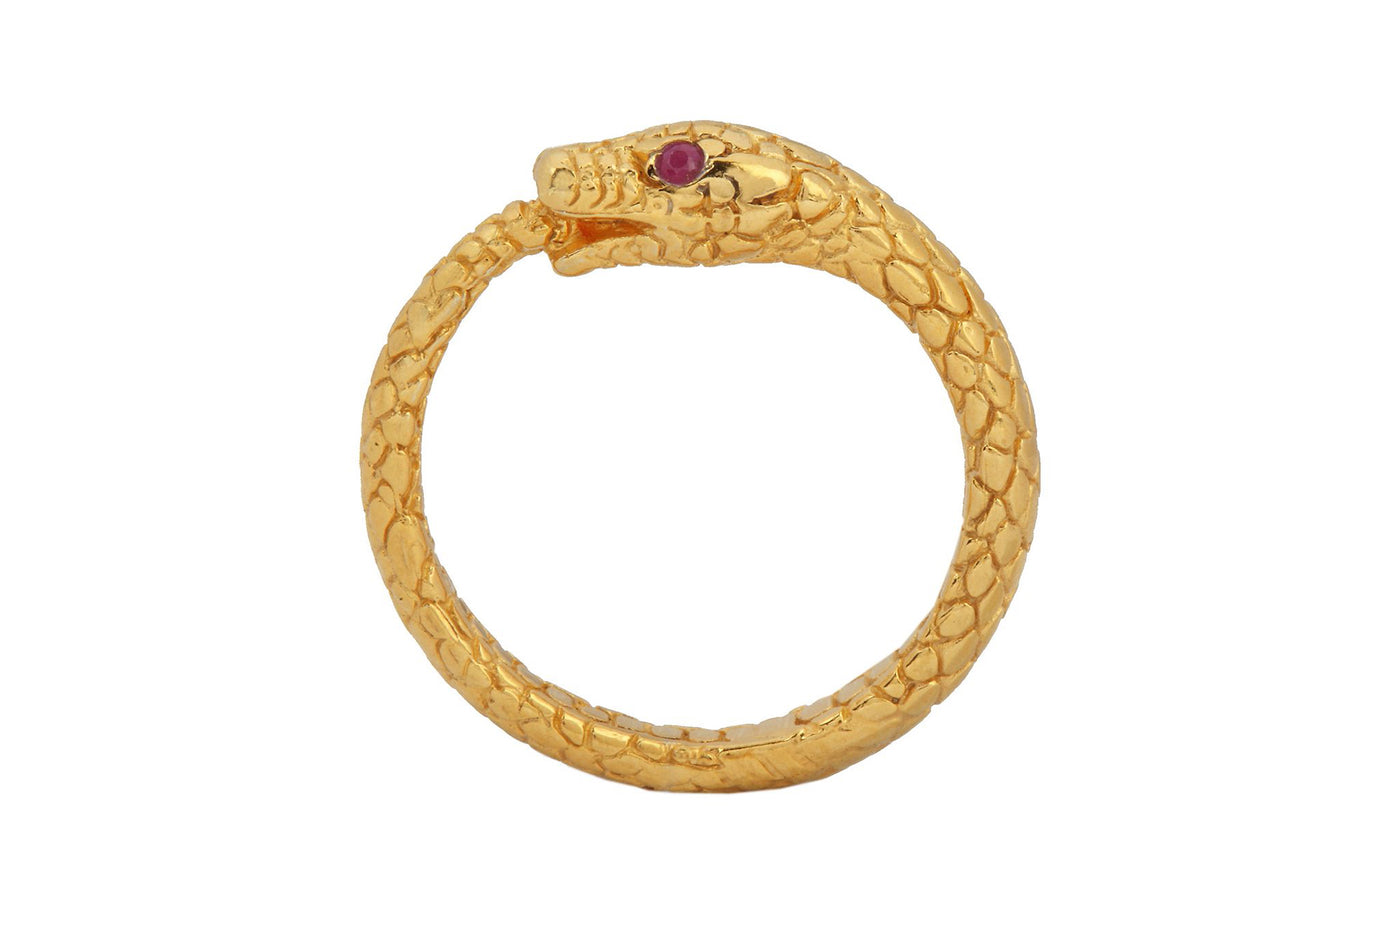 Solid gold Snake ring with 2 stones